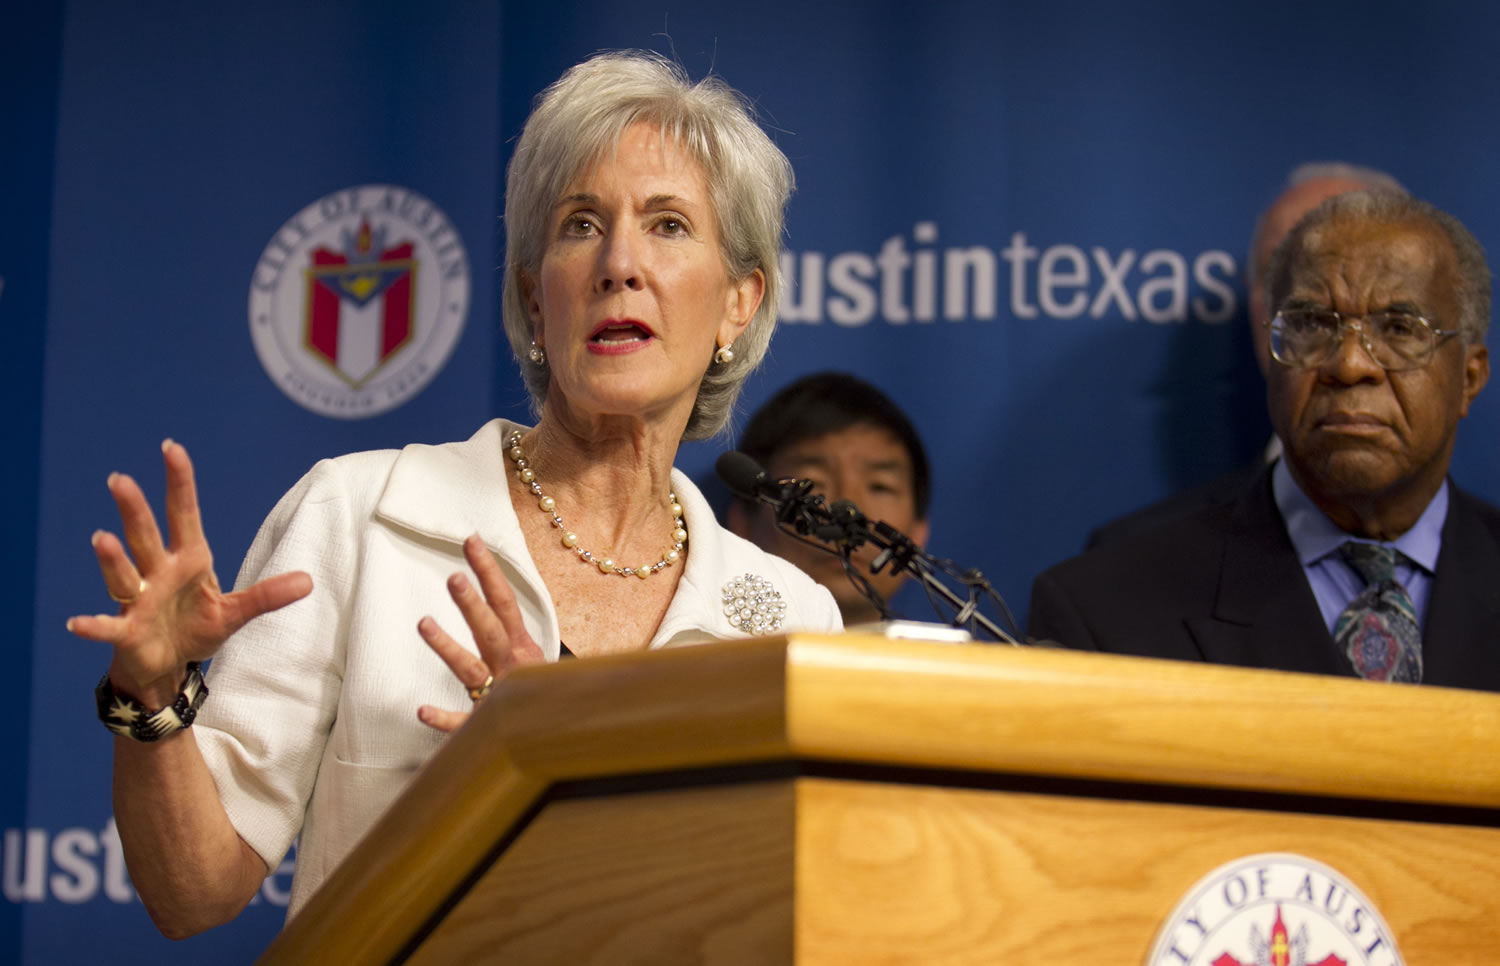 Secretary of Health and Human Services Kathleen Sebelius, left, speaks at a news conference at City Hall in Austin, Texas, on Thursday.